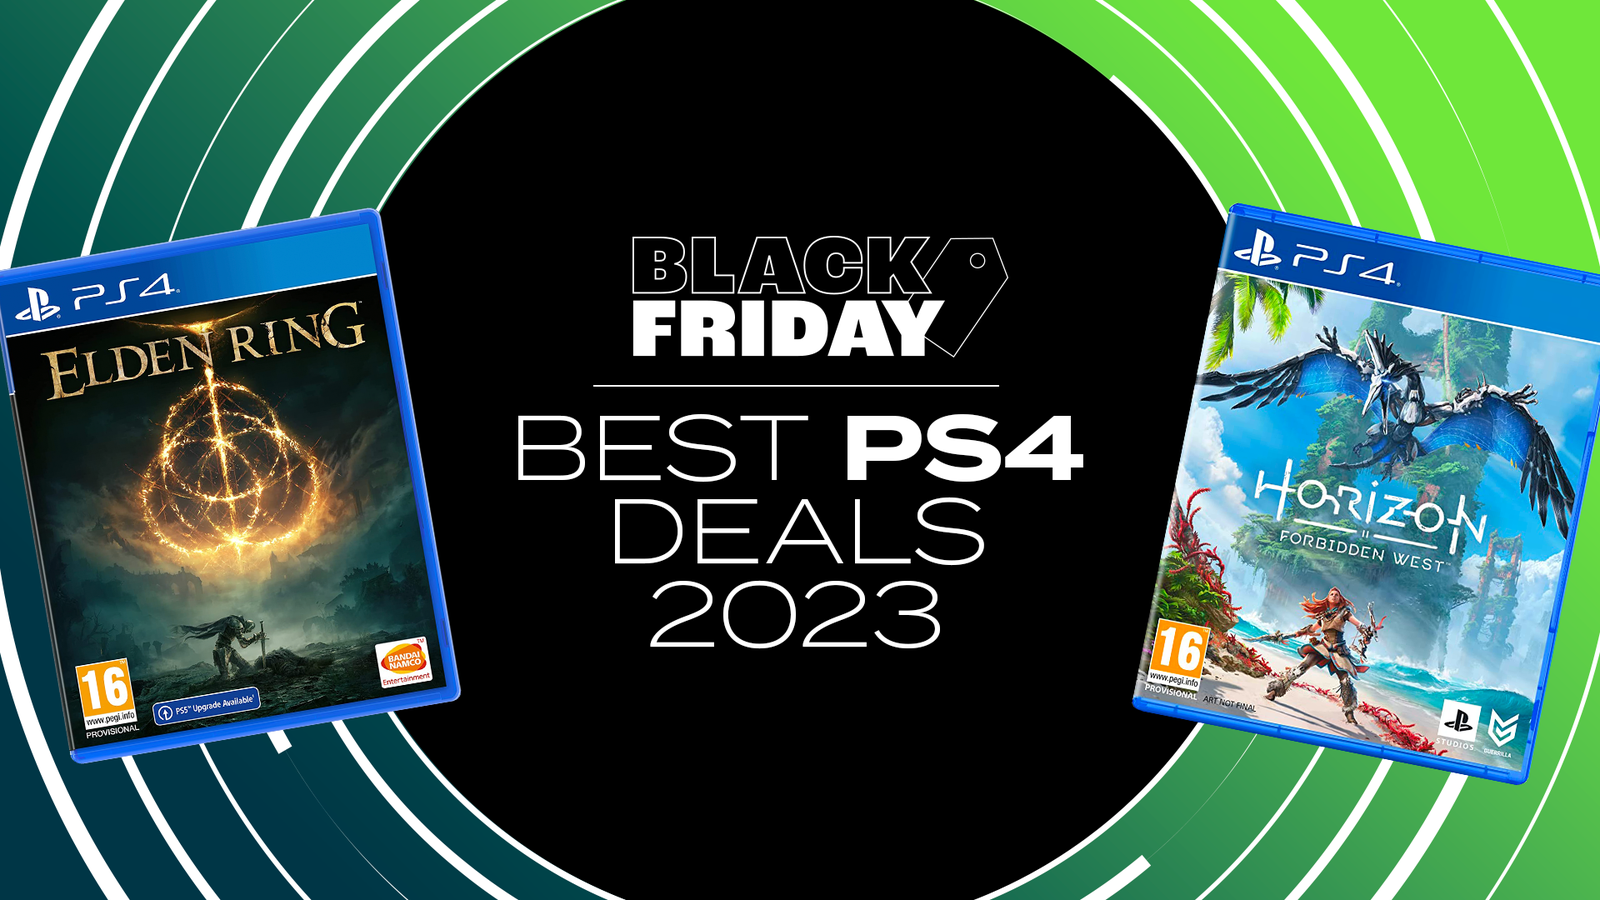 These are the Black Friday deals on the PlayStation store that I